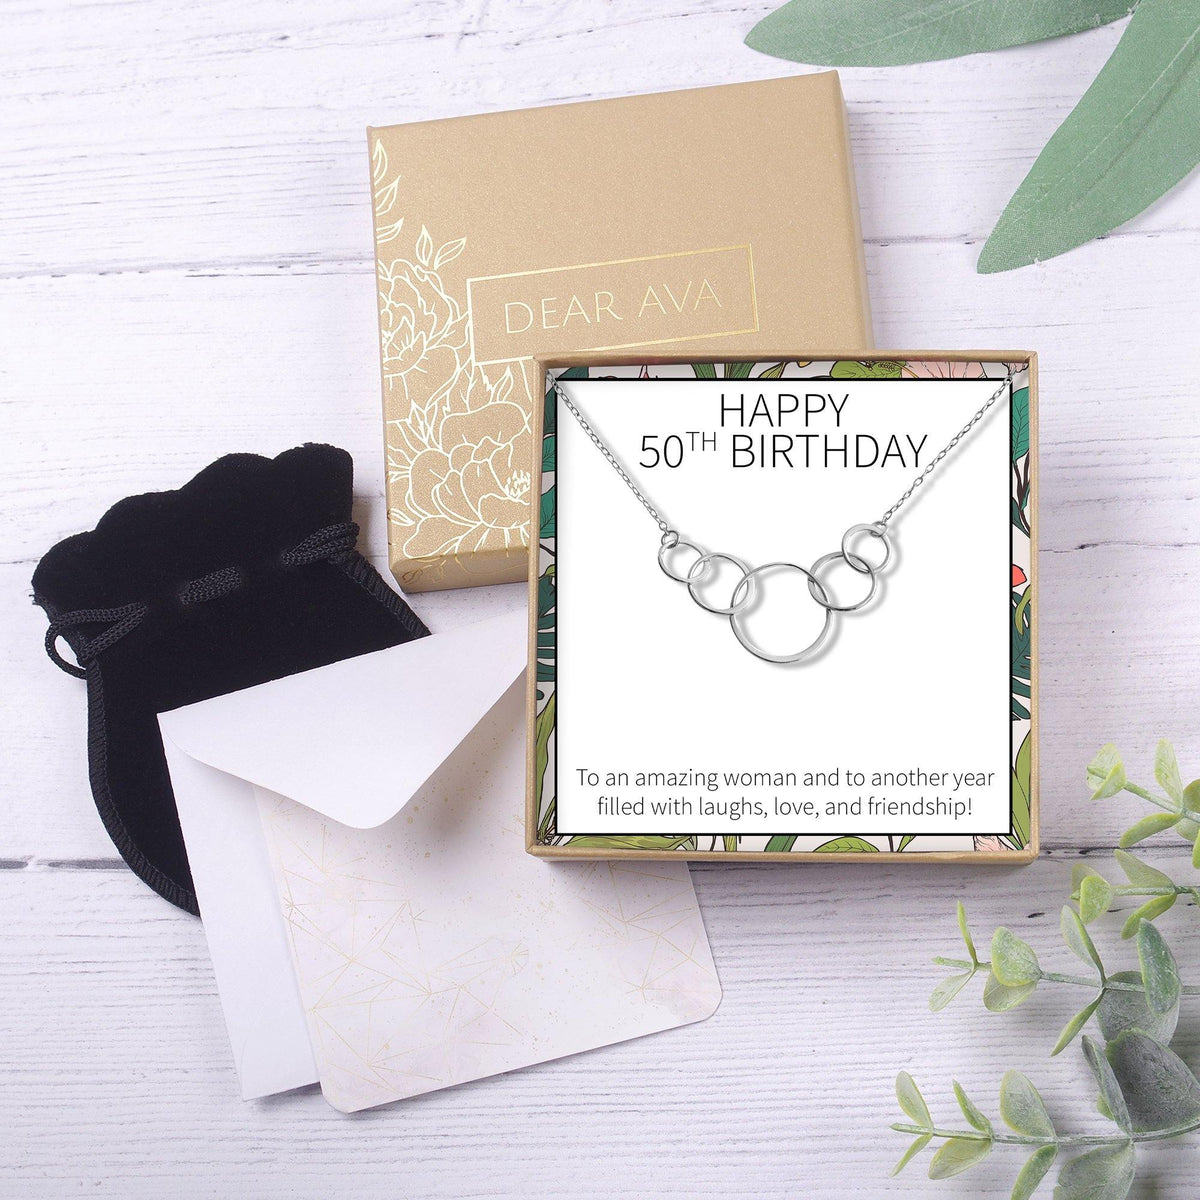 50th Birthday Necklace - Dear Ava, Jewelry / Necklaces / Pendants